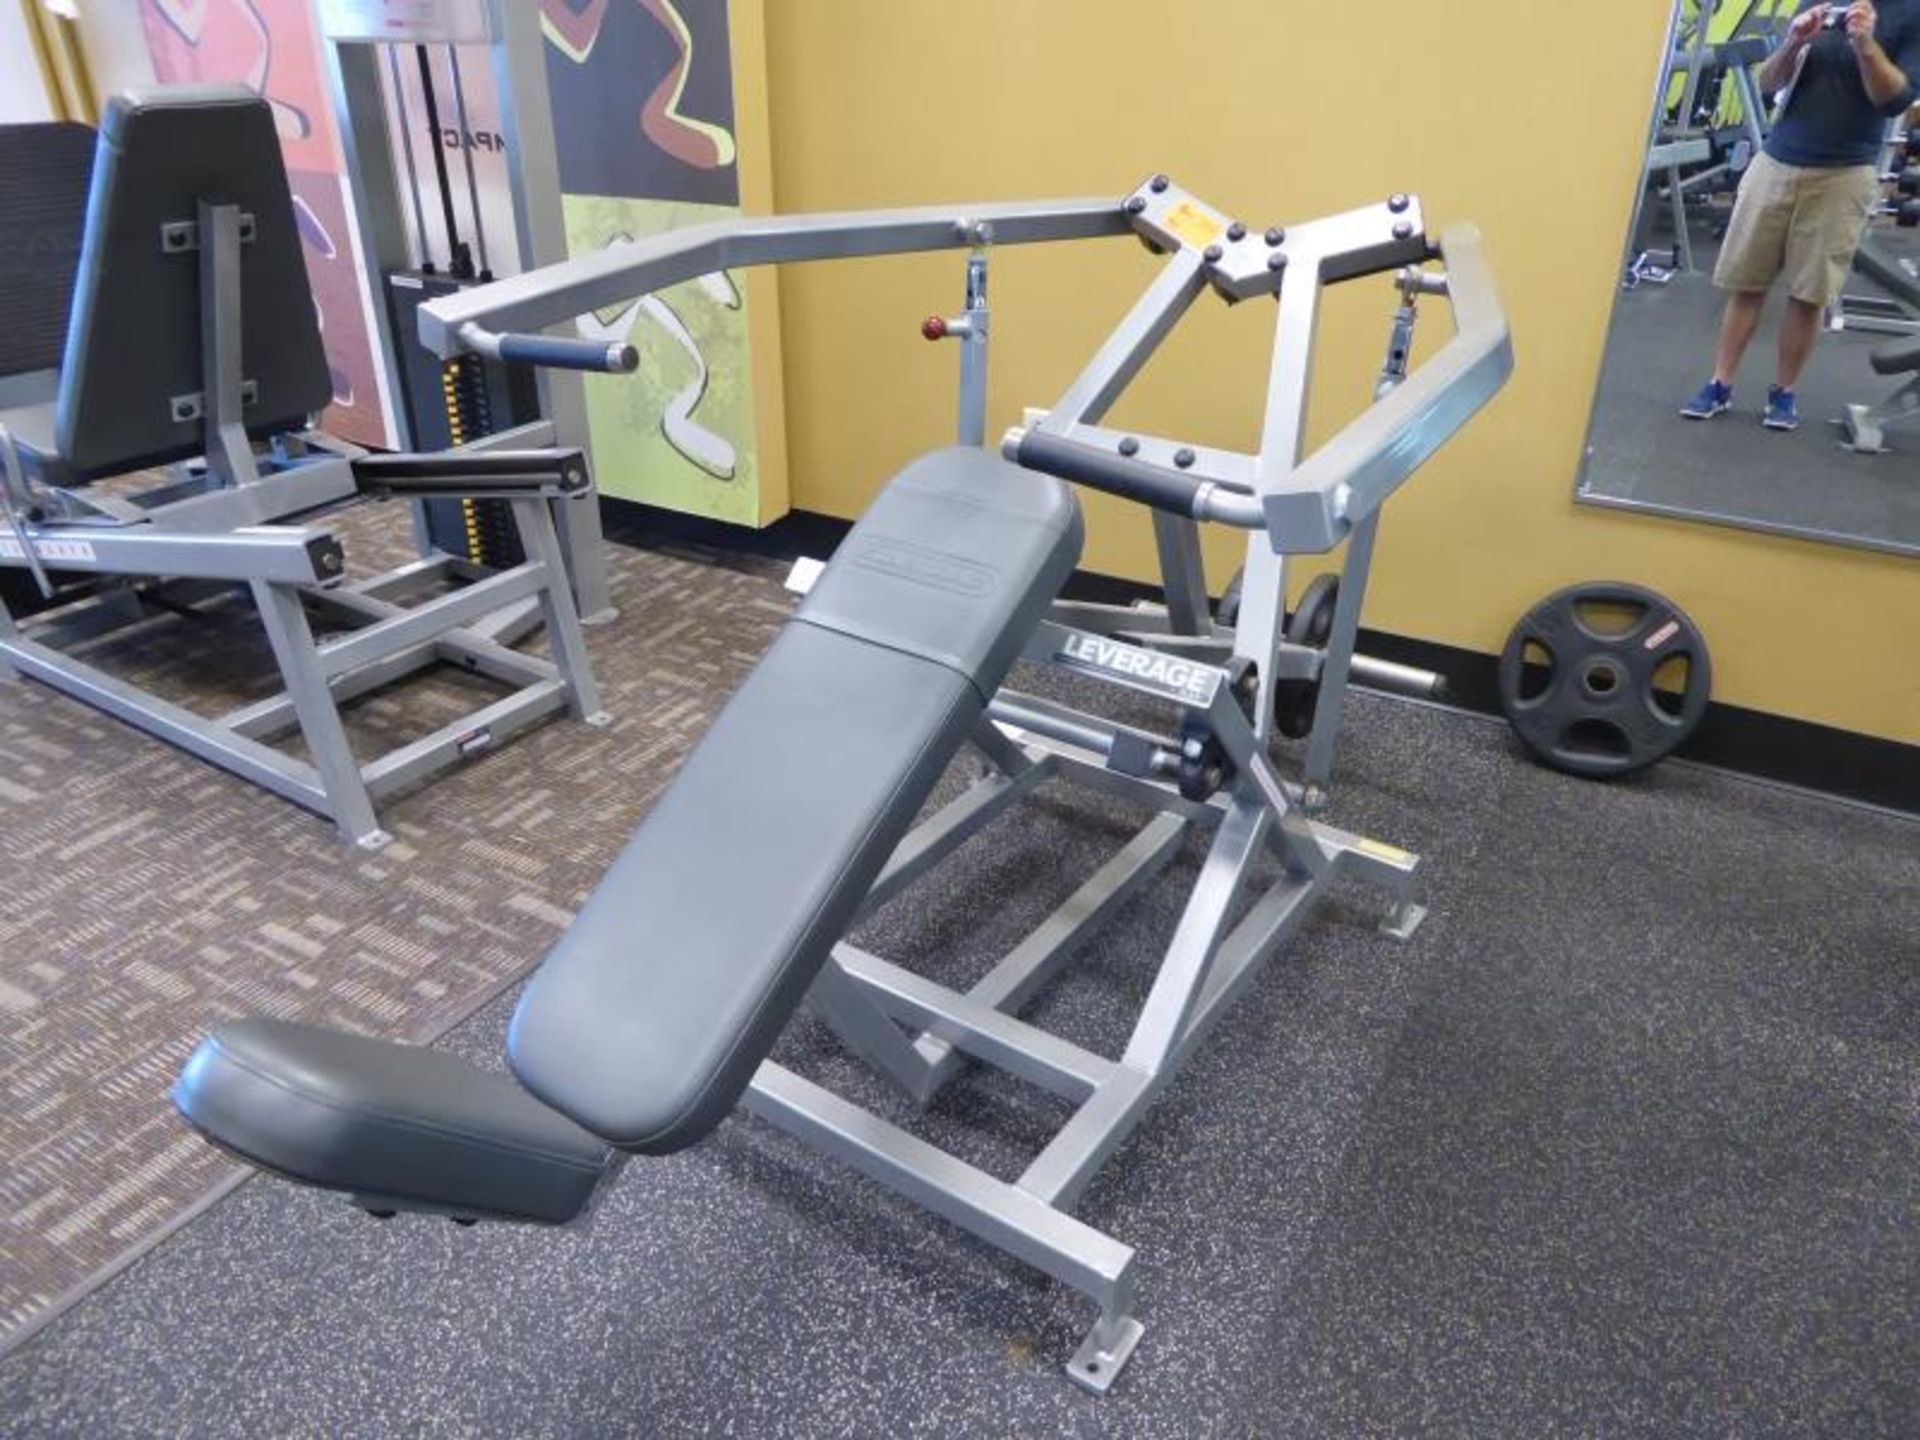 Star Trac Leverage by Flex, Incline Bench, Model: L-2001, SN: LE70701541 L-2001, SN: LE70701541 - Image 2 of 2